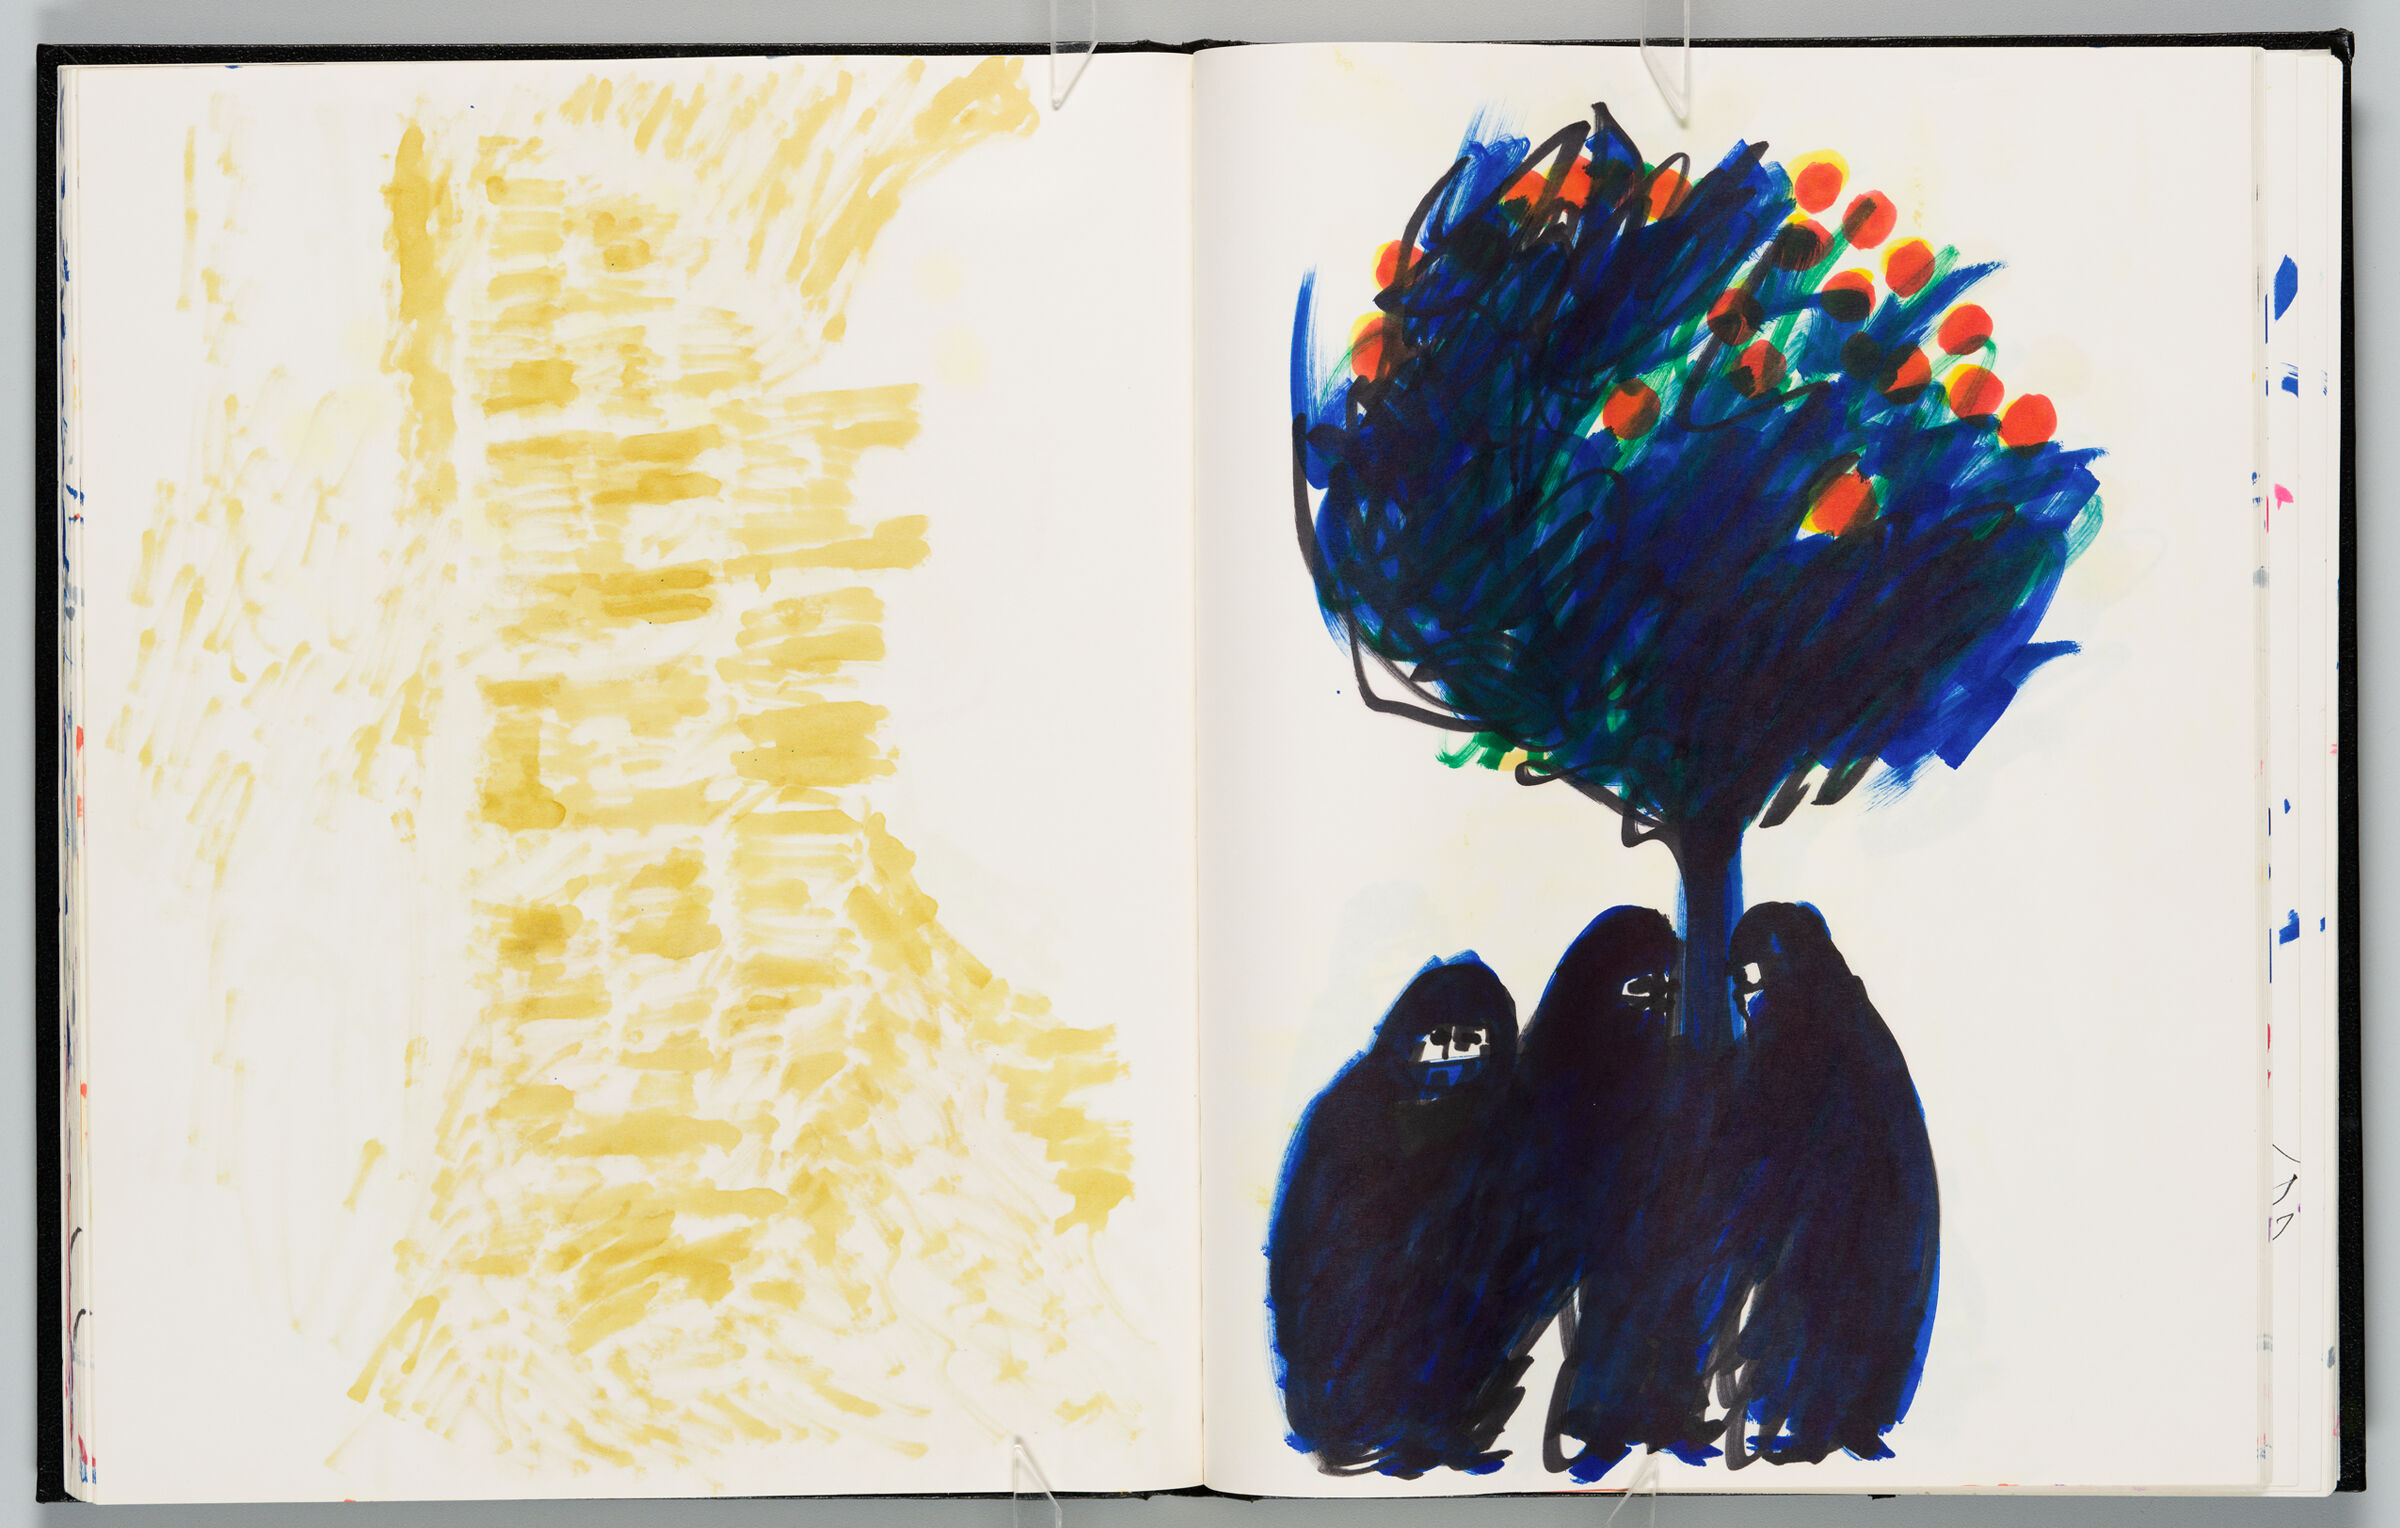 Untitled (Bleed-Through Of Previous Page, Left Page); Untitled (Three Veiled Figures Under Fruit Tree, Right Page)